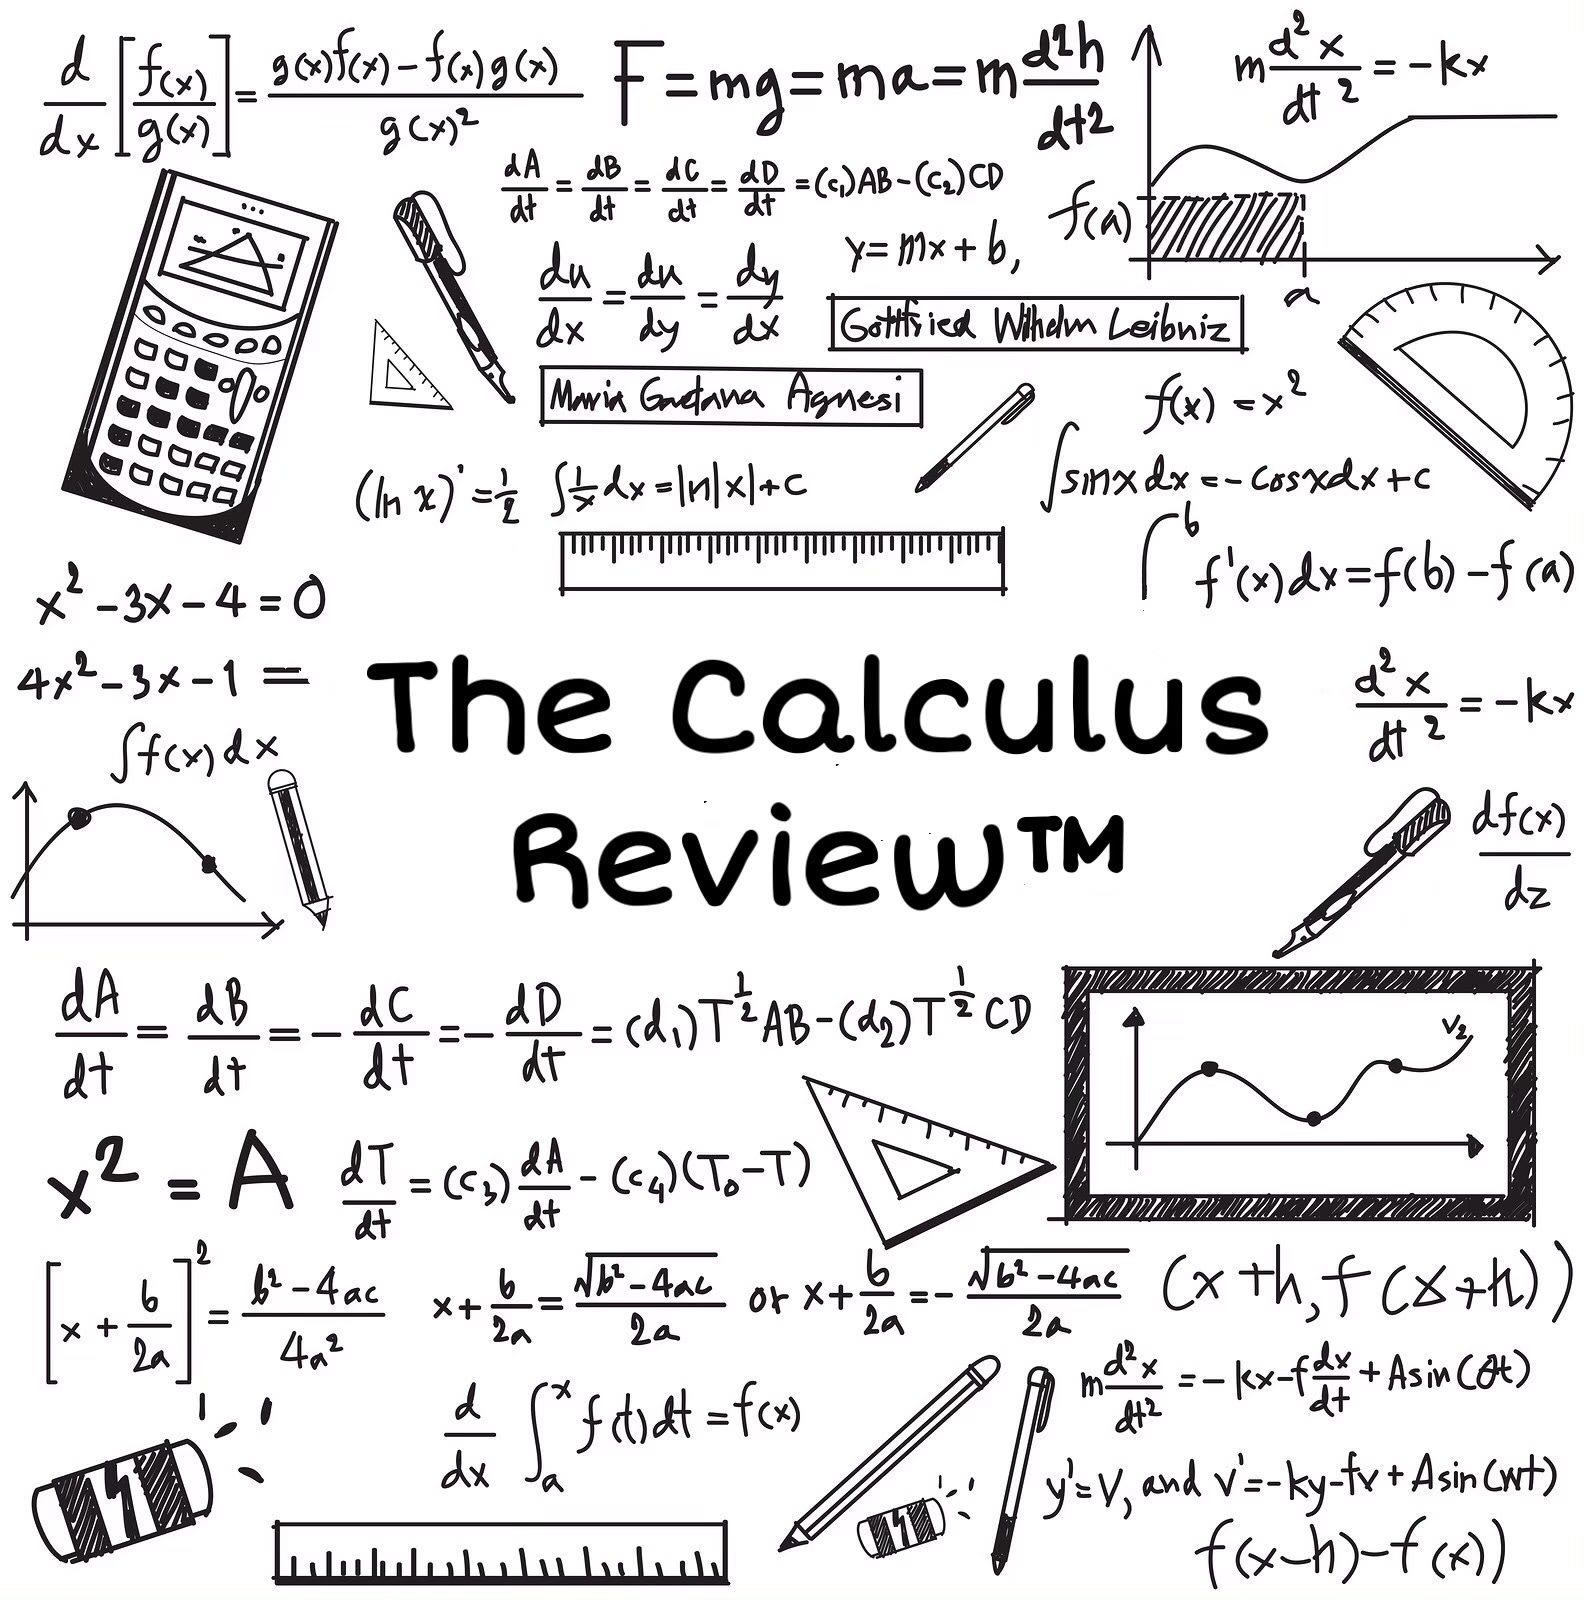 The Calculus Review